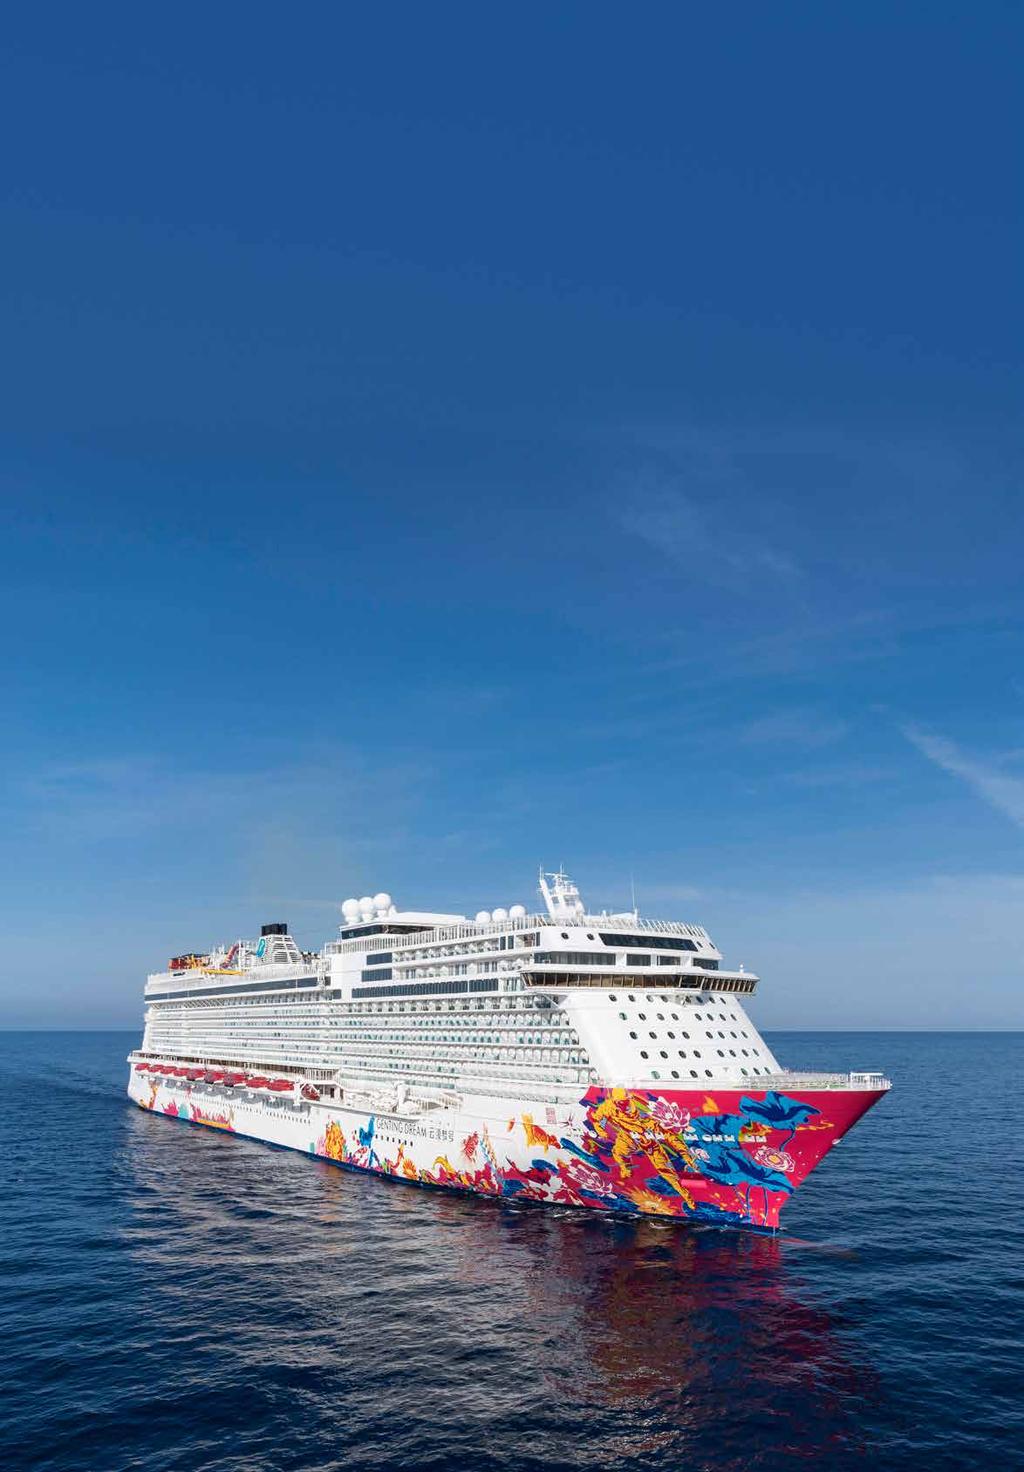 New ship. New possibilities. Dream Cruises is the firstever Asian luxury cruise line and we re here to bring your dream event to life with Genting Dream, our inaugural ship.